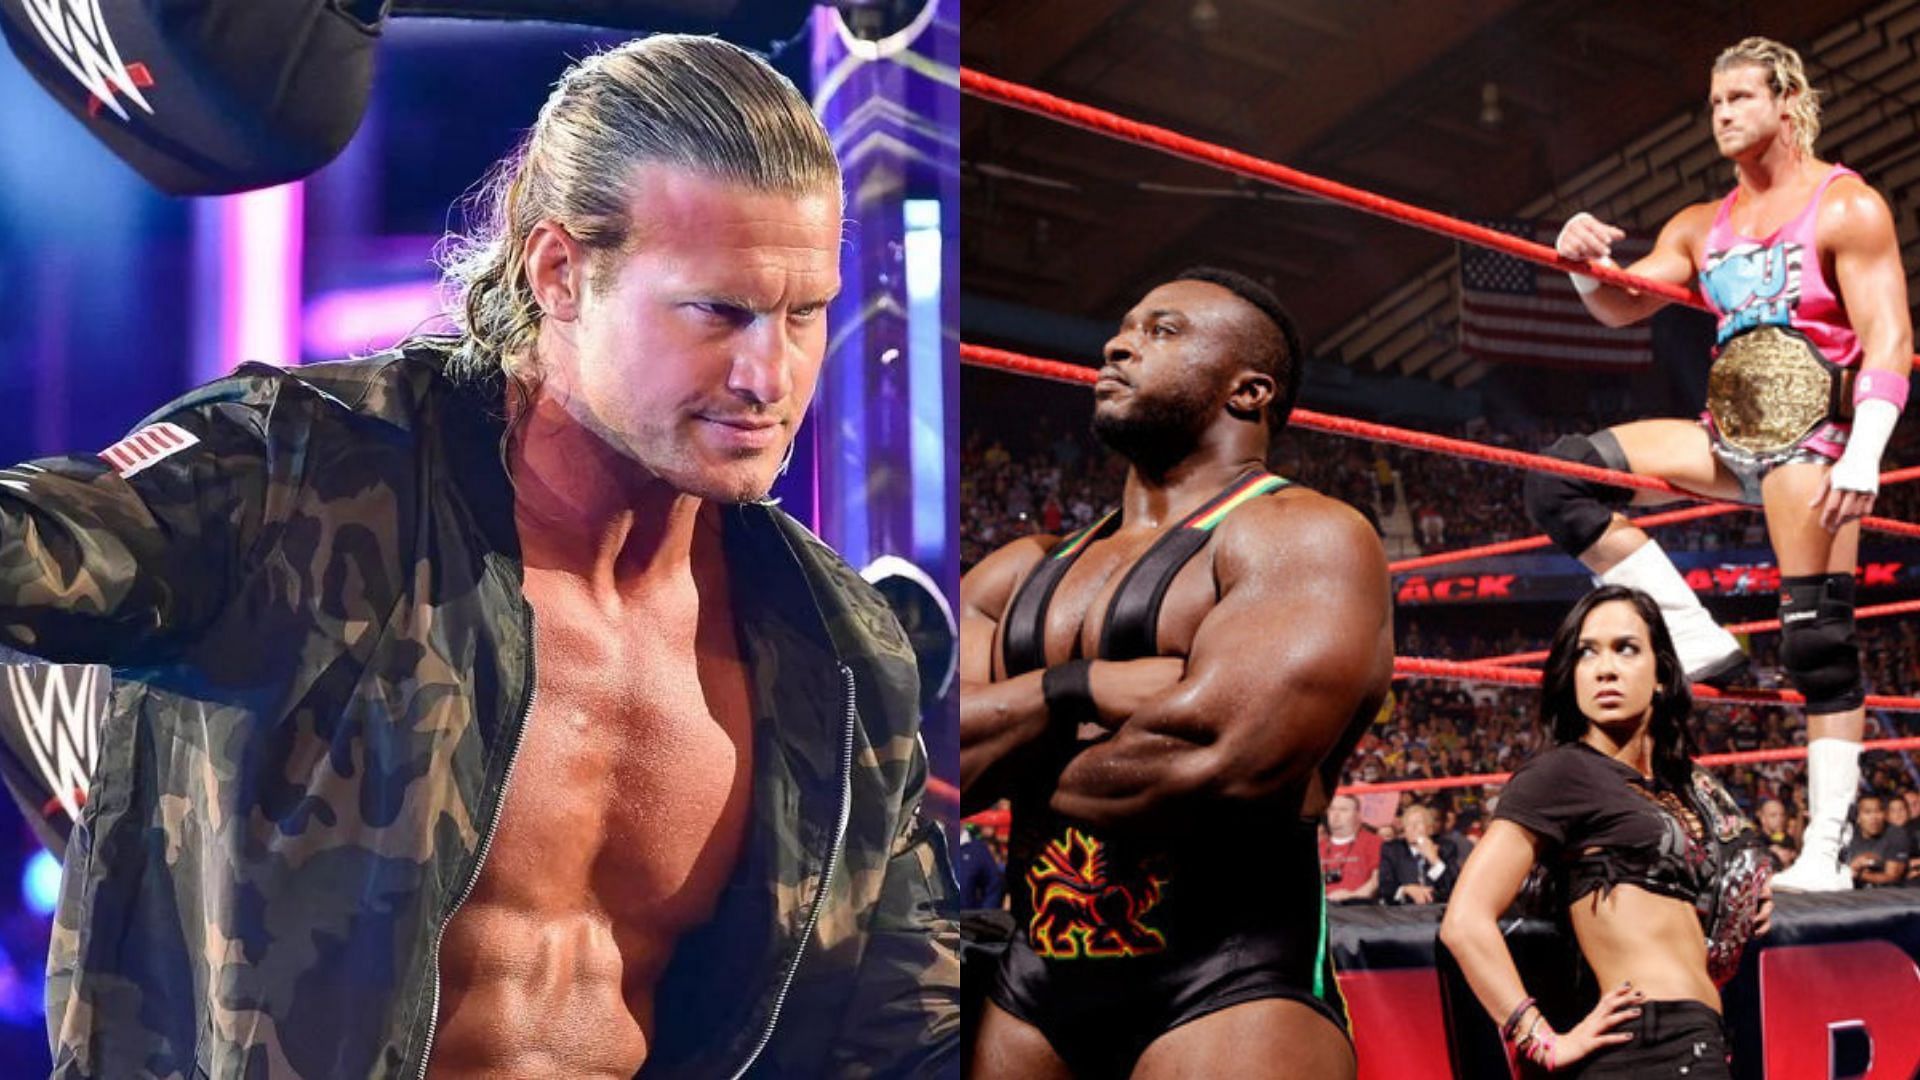 Big E and Dolph Ziggler were previously in an alliance